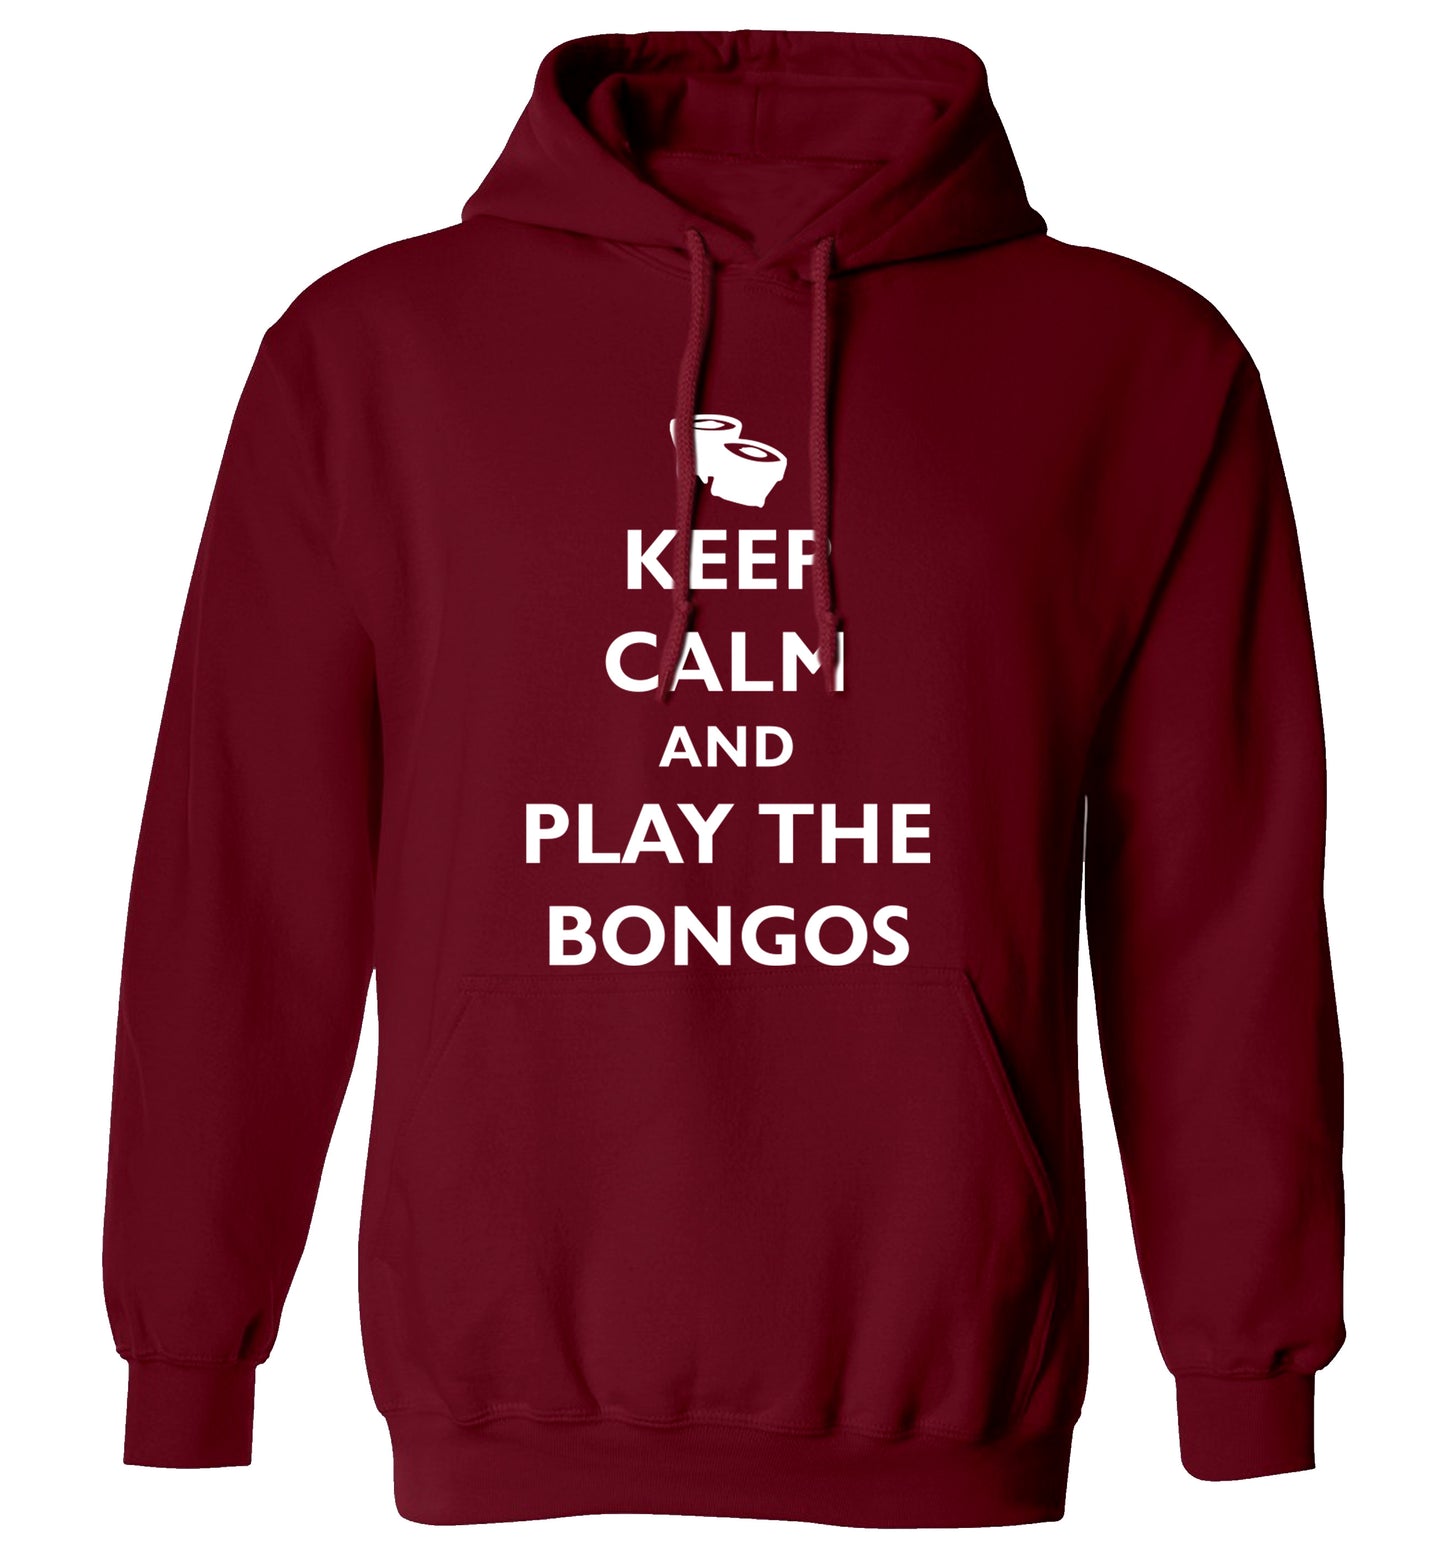 Keep calm and play the bongos adults unisex maroon hoodie 2XL